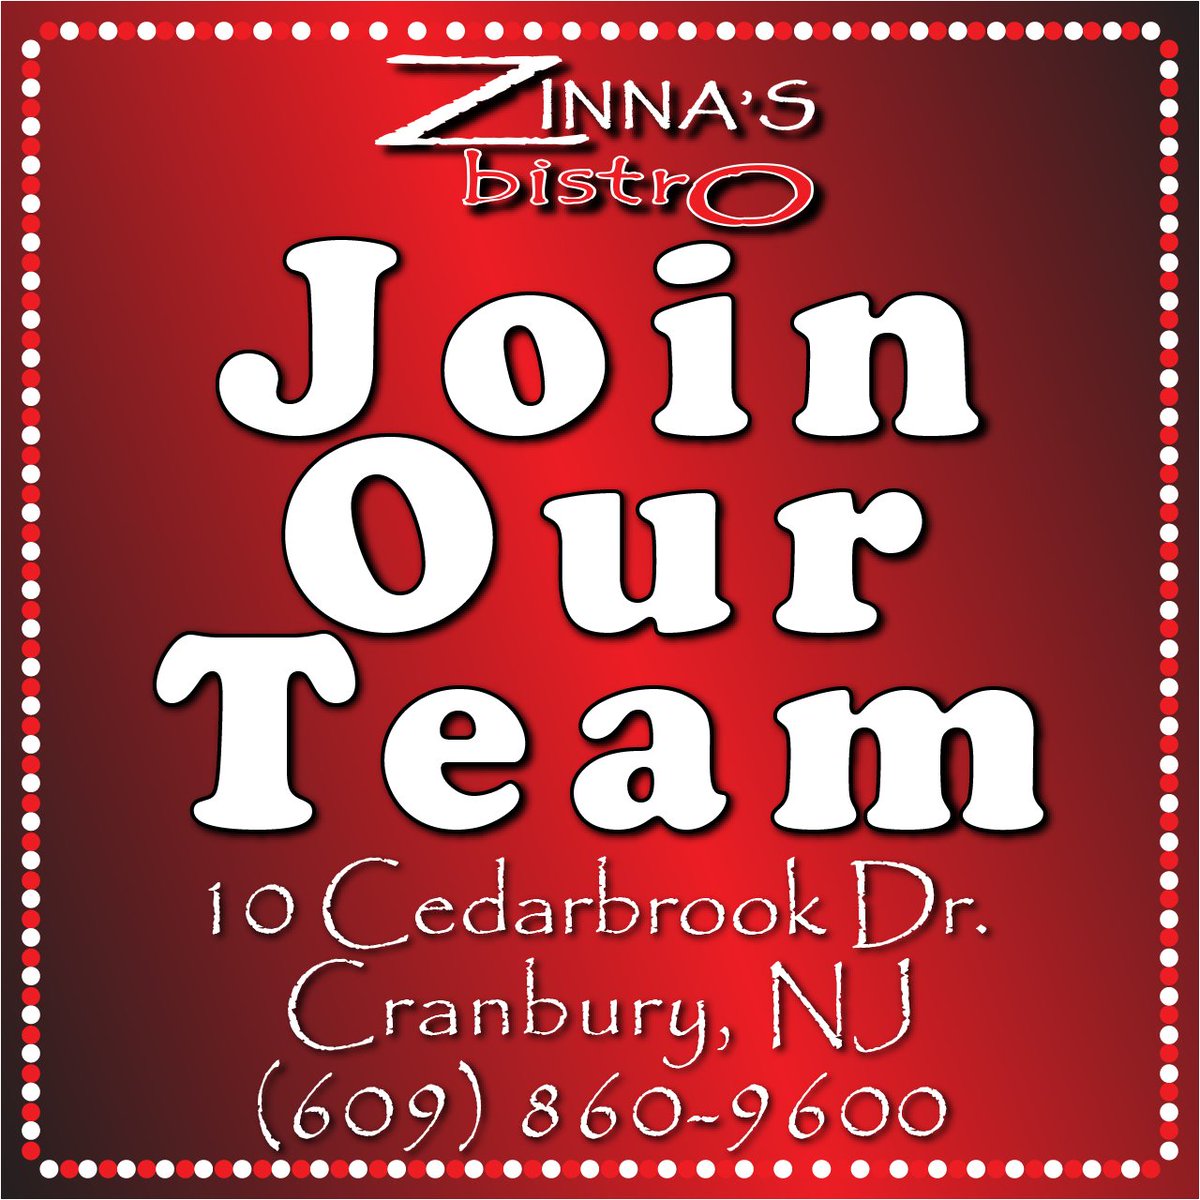 We have immediate openings on our team!

All front & back of house roles.
Hosts | Servers | Managers | Bussers
Cashiers | Expo | Dishwashers | Prep Staff

Please call the restaurant to speak with our managers for more info 
☎️ (609) 860-9600

#ZinnasBistro #NowHIriing